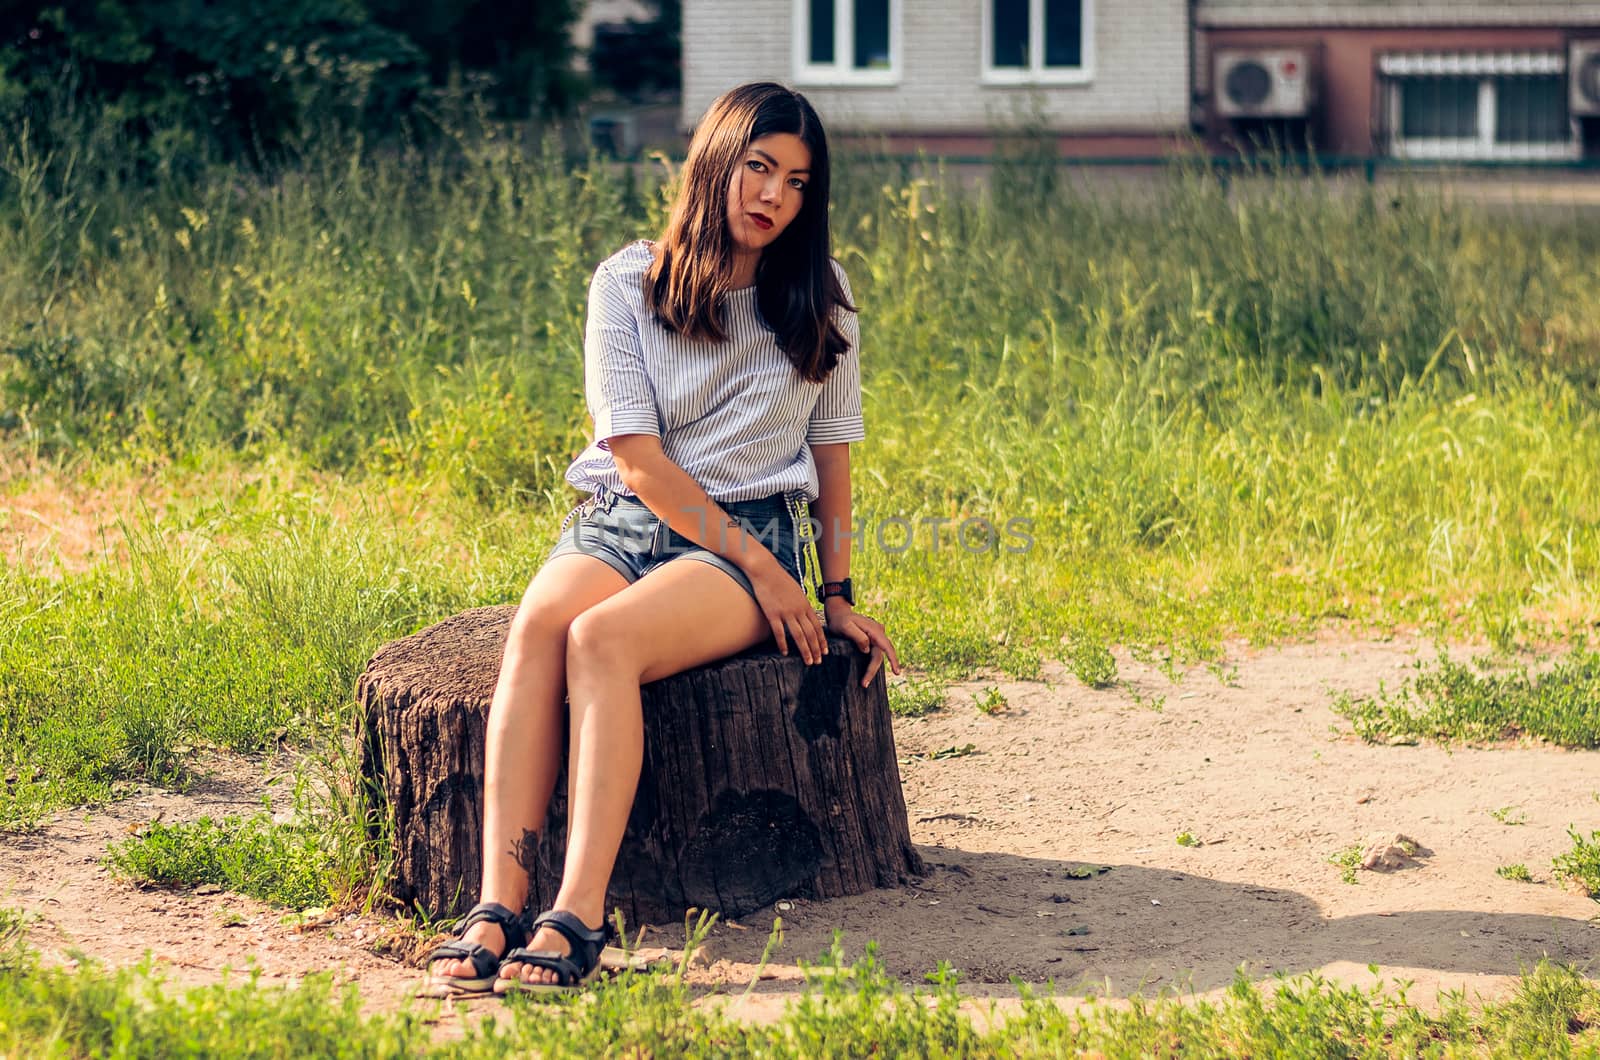 Teen Girl in a blue jeans shorts sitting on a Stump